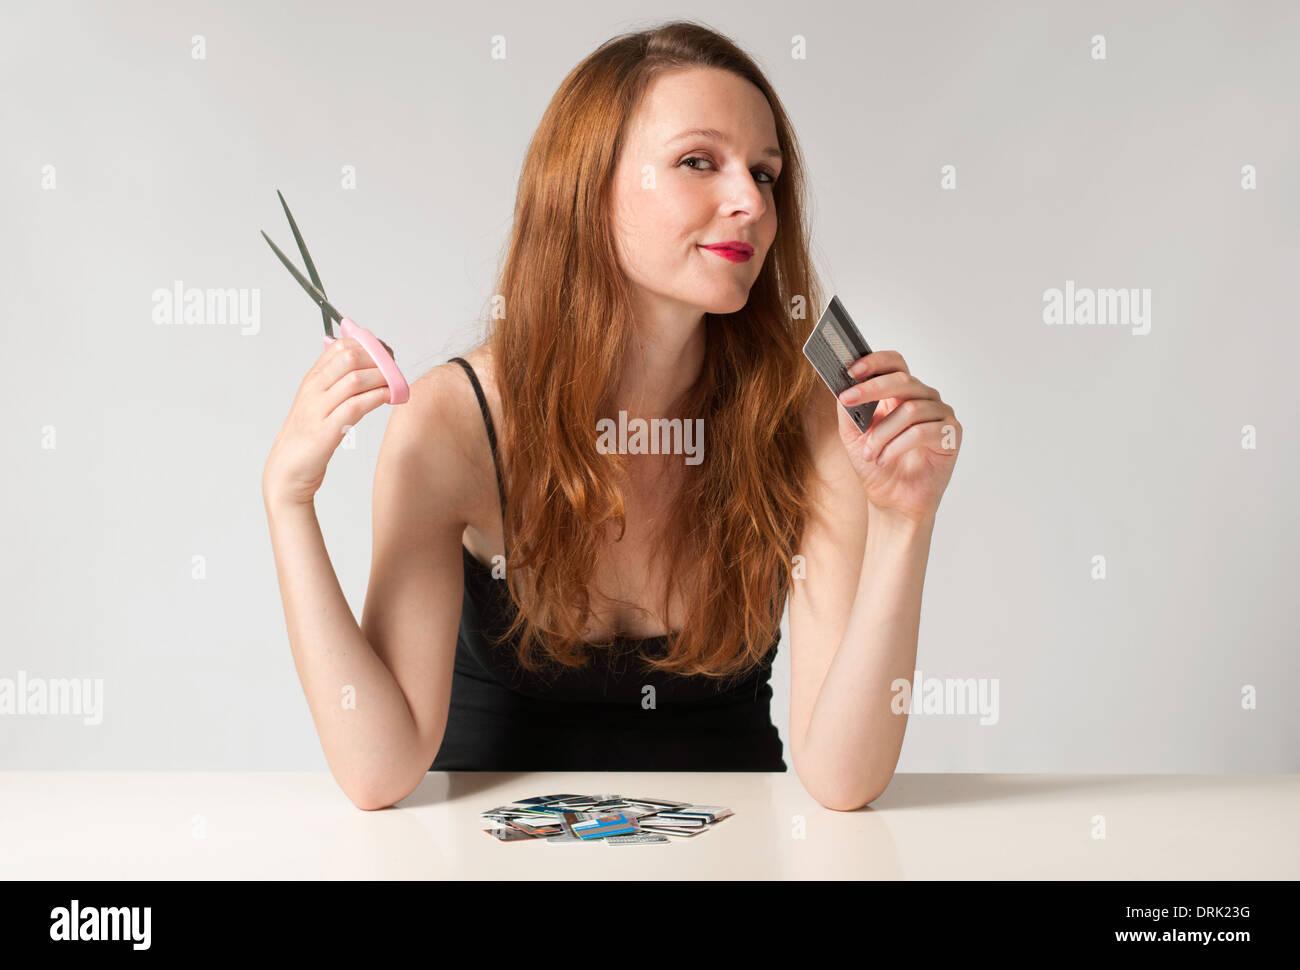 Woman holding a credit card ready to cut it with a scissors, financial freedom concept Stock Photo